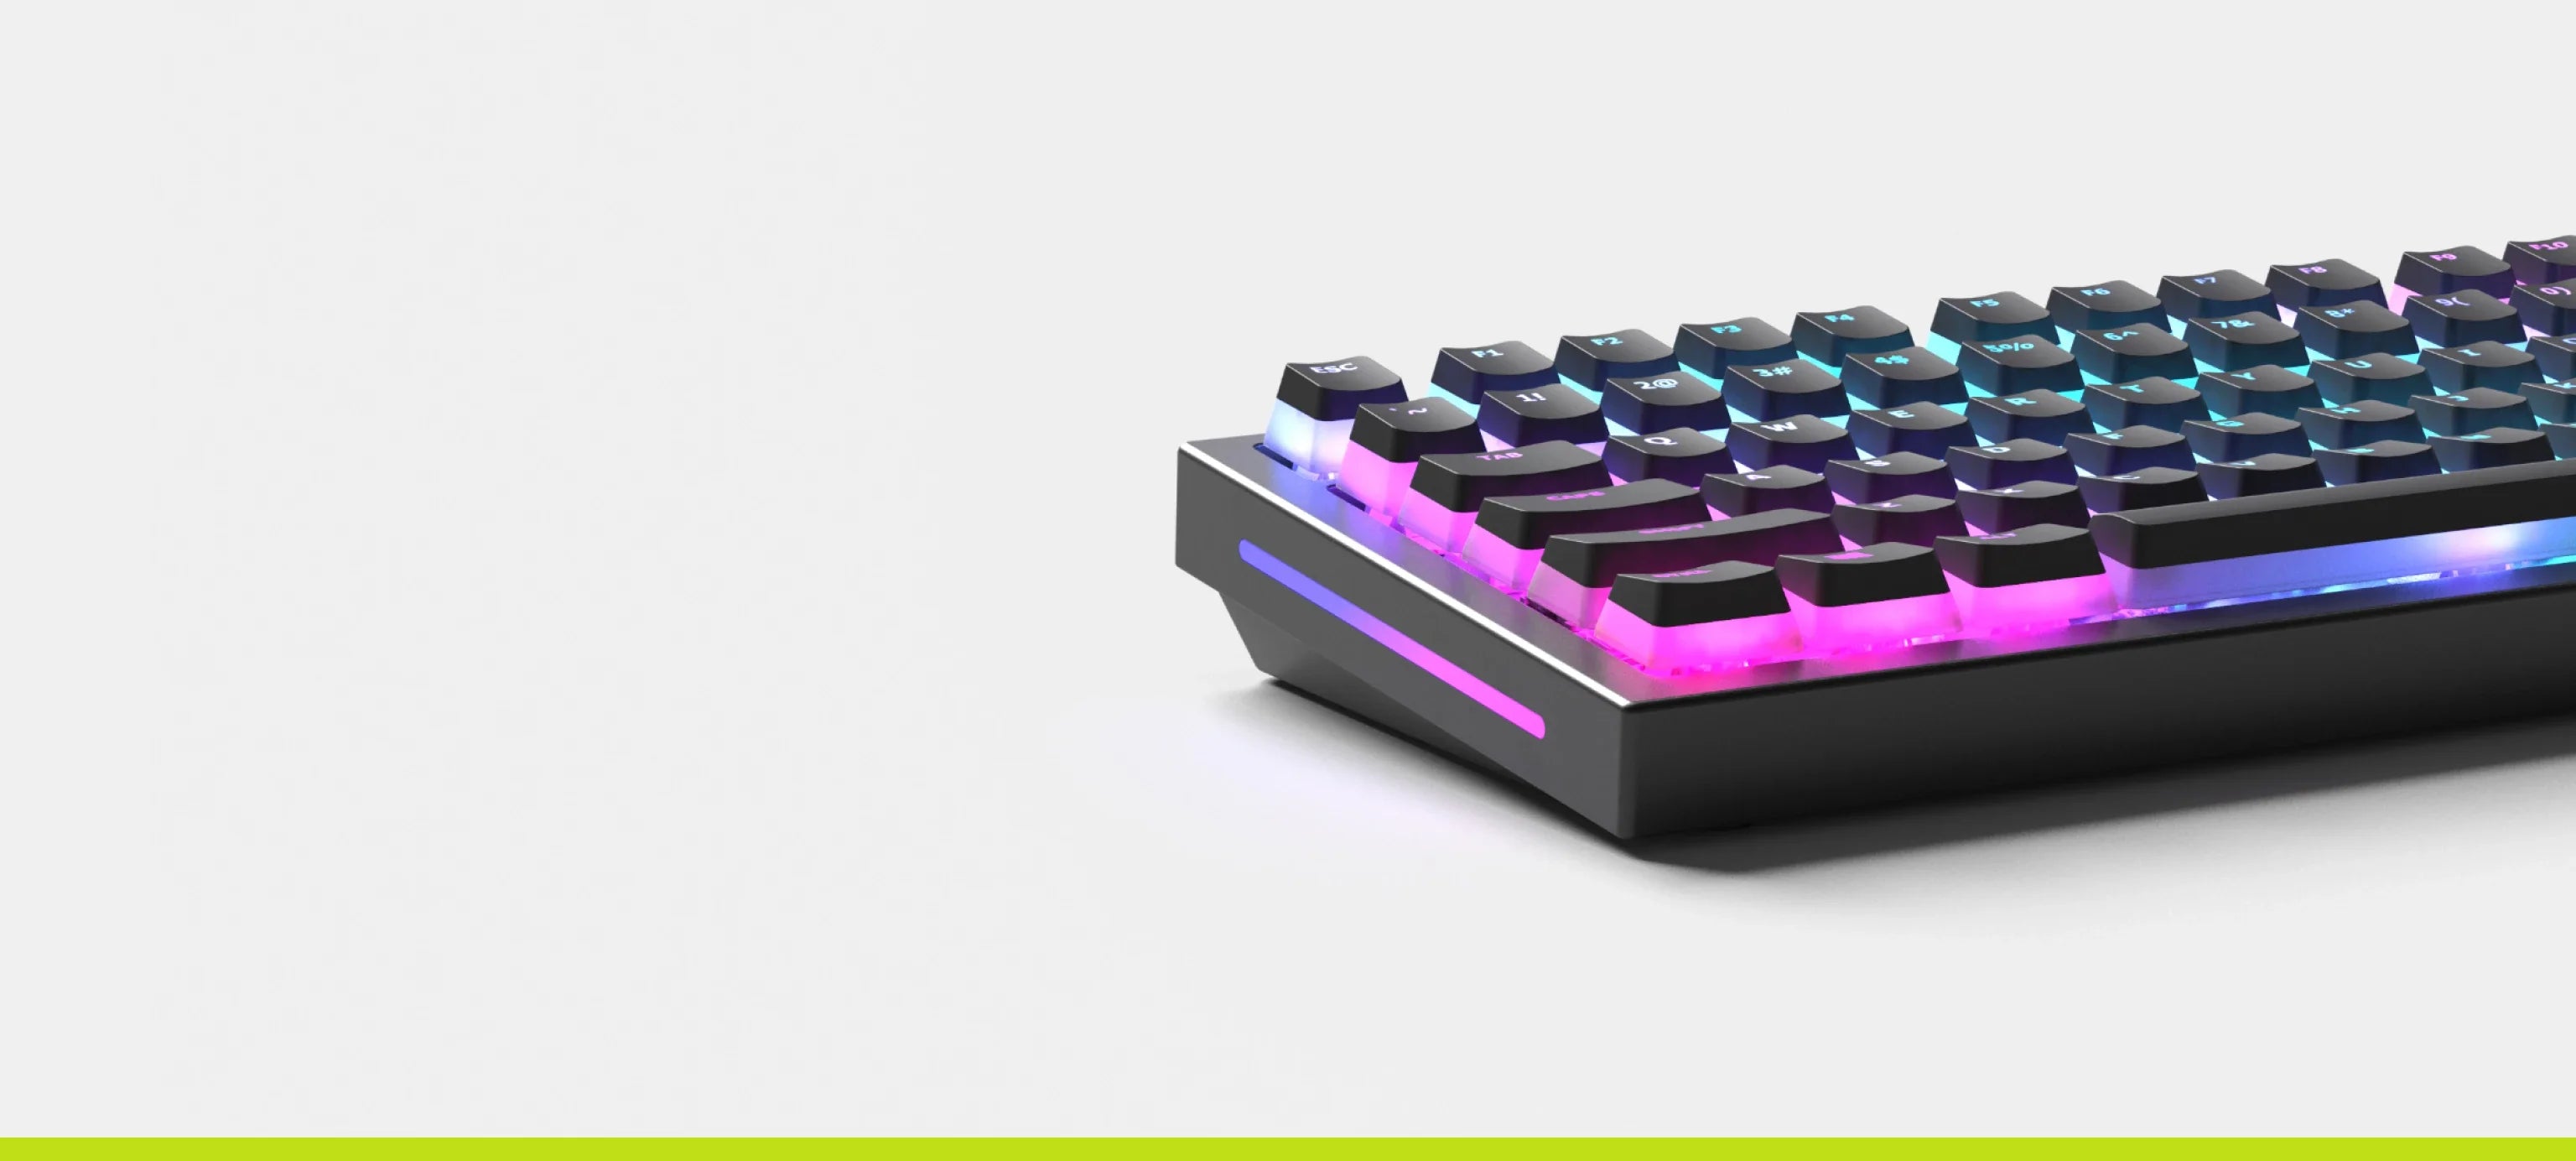 GMMK PRO in Black Slate with Aura V2 Black keycaps and pink and purple RGB lighting